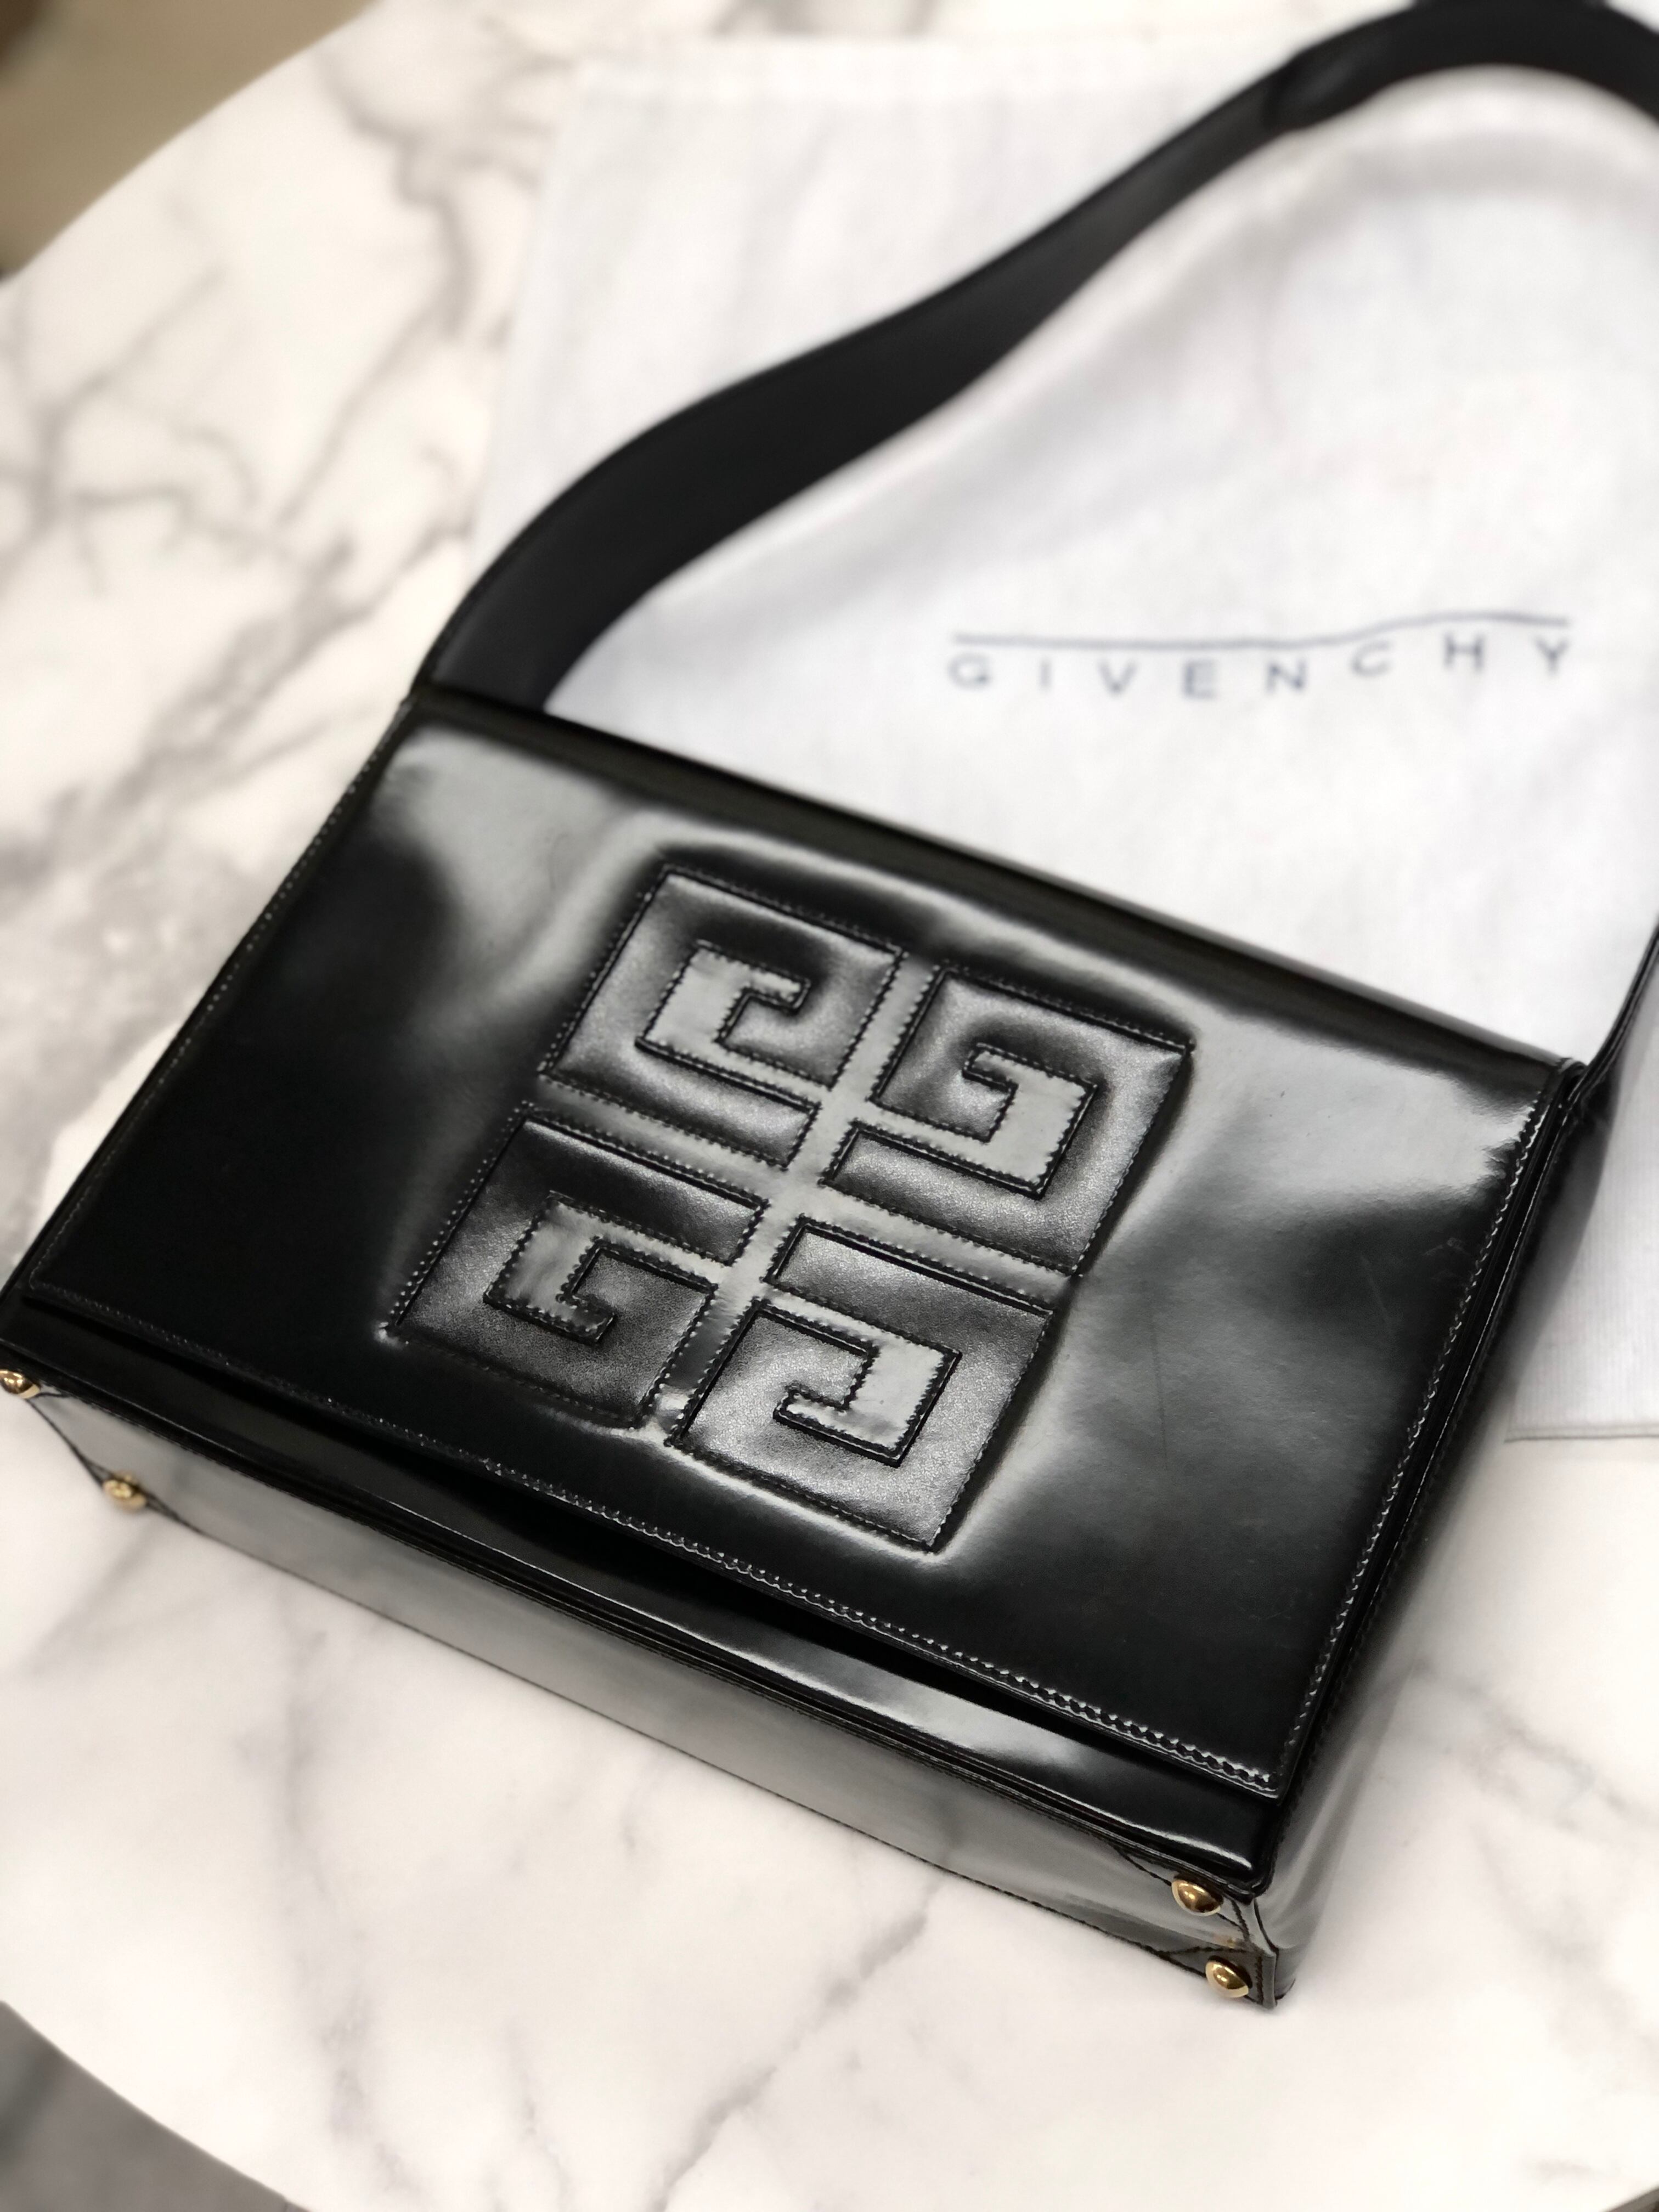 GIVENCHY ジバンシィ　ビッグロゴ　エナメル　ボックス　フラップ　ホーボー　ショルダーバッグ ブラック　vintage　ヴィンテージ　オールド　 ri2kzs | VintageShop solo powered by BASE